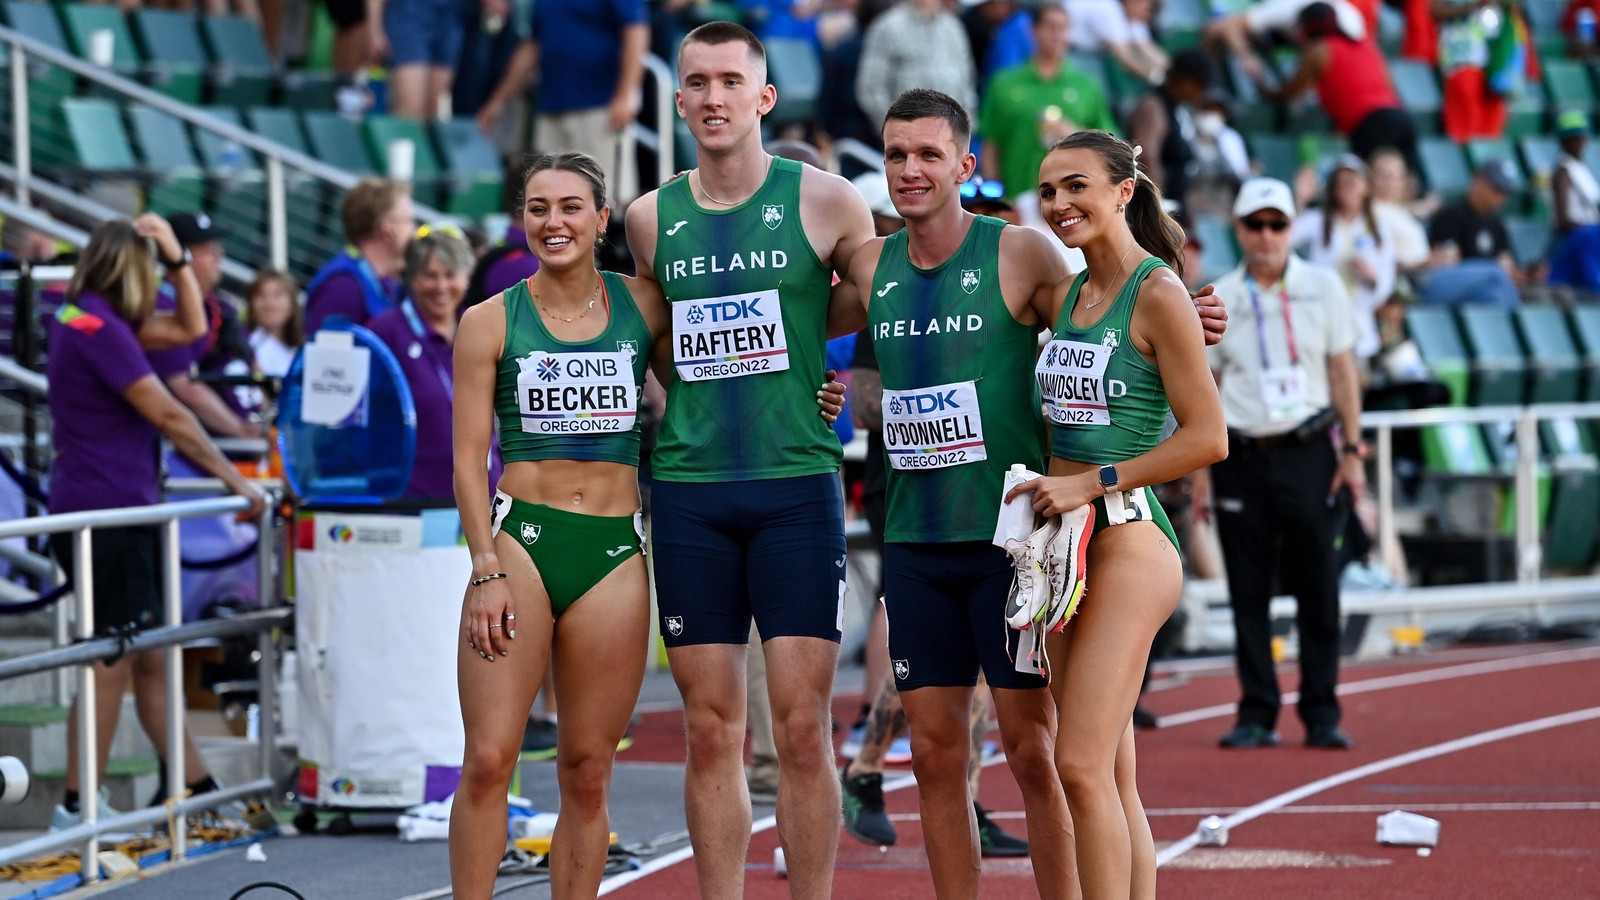 Ireland mixed relay team 8th in 4x400m world final